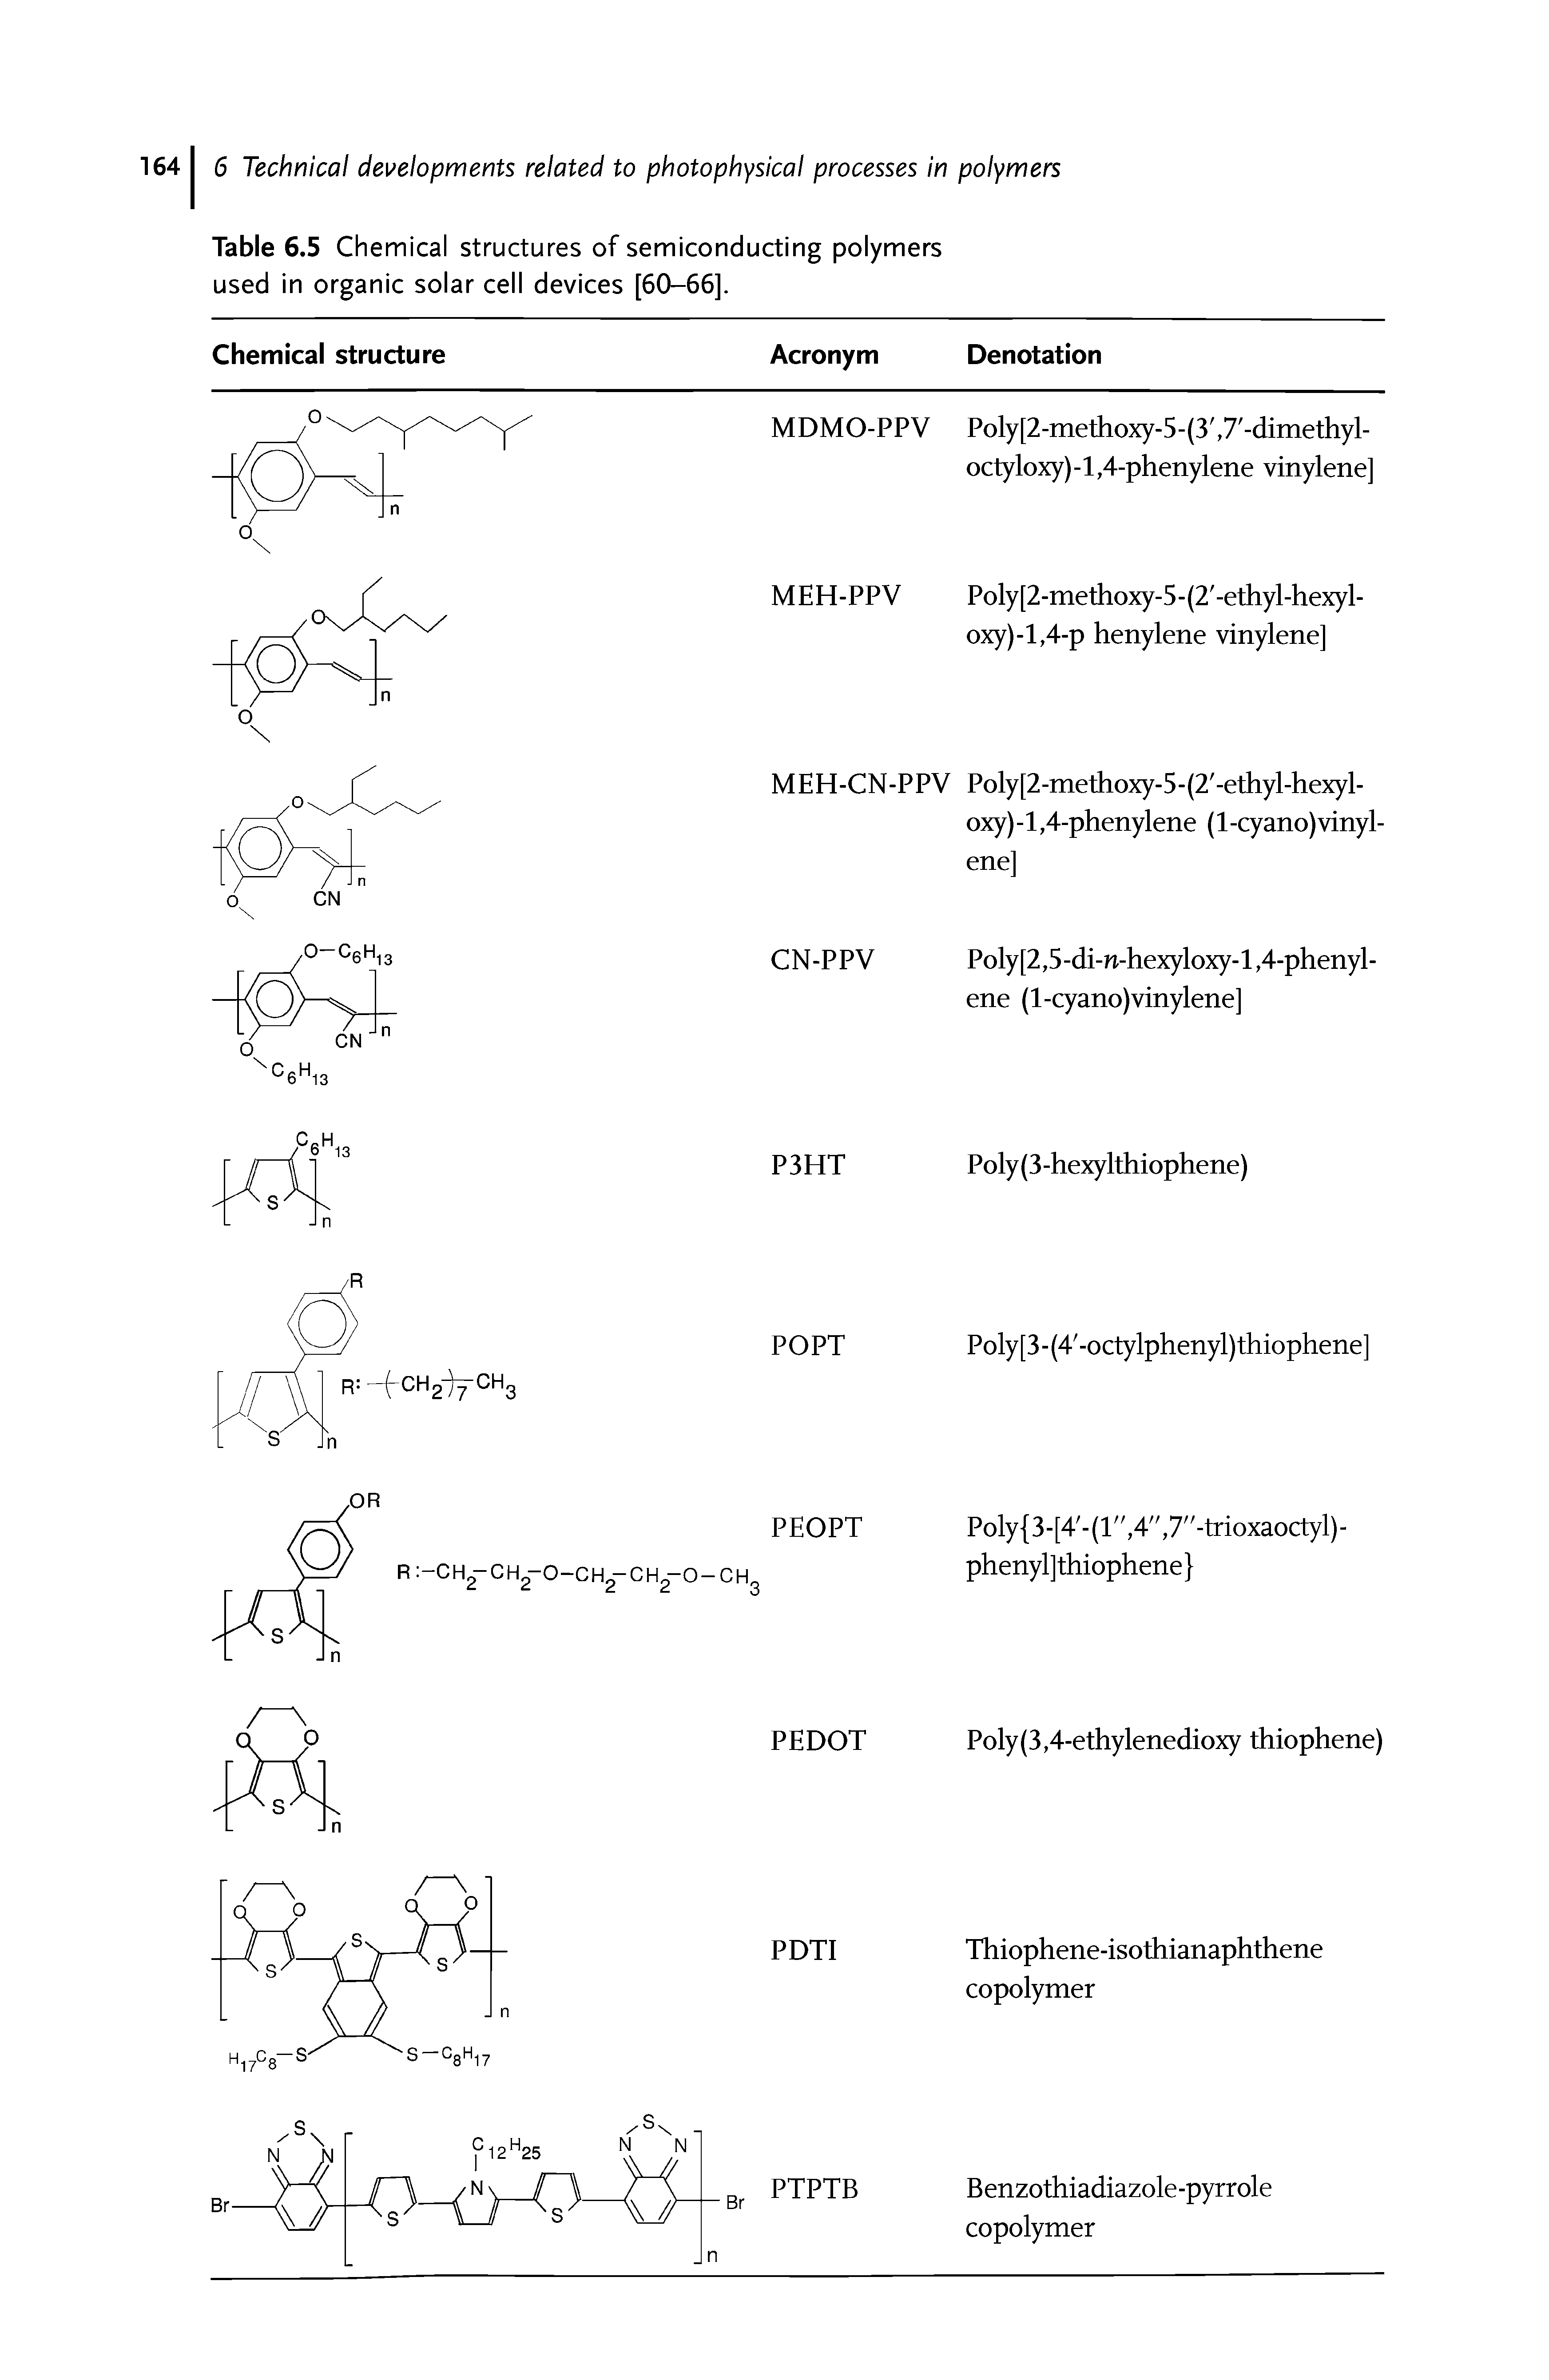 Table 6.5 Chemical structures of semiconducting polymers used in organic solar cell devices [60-66].